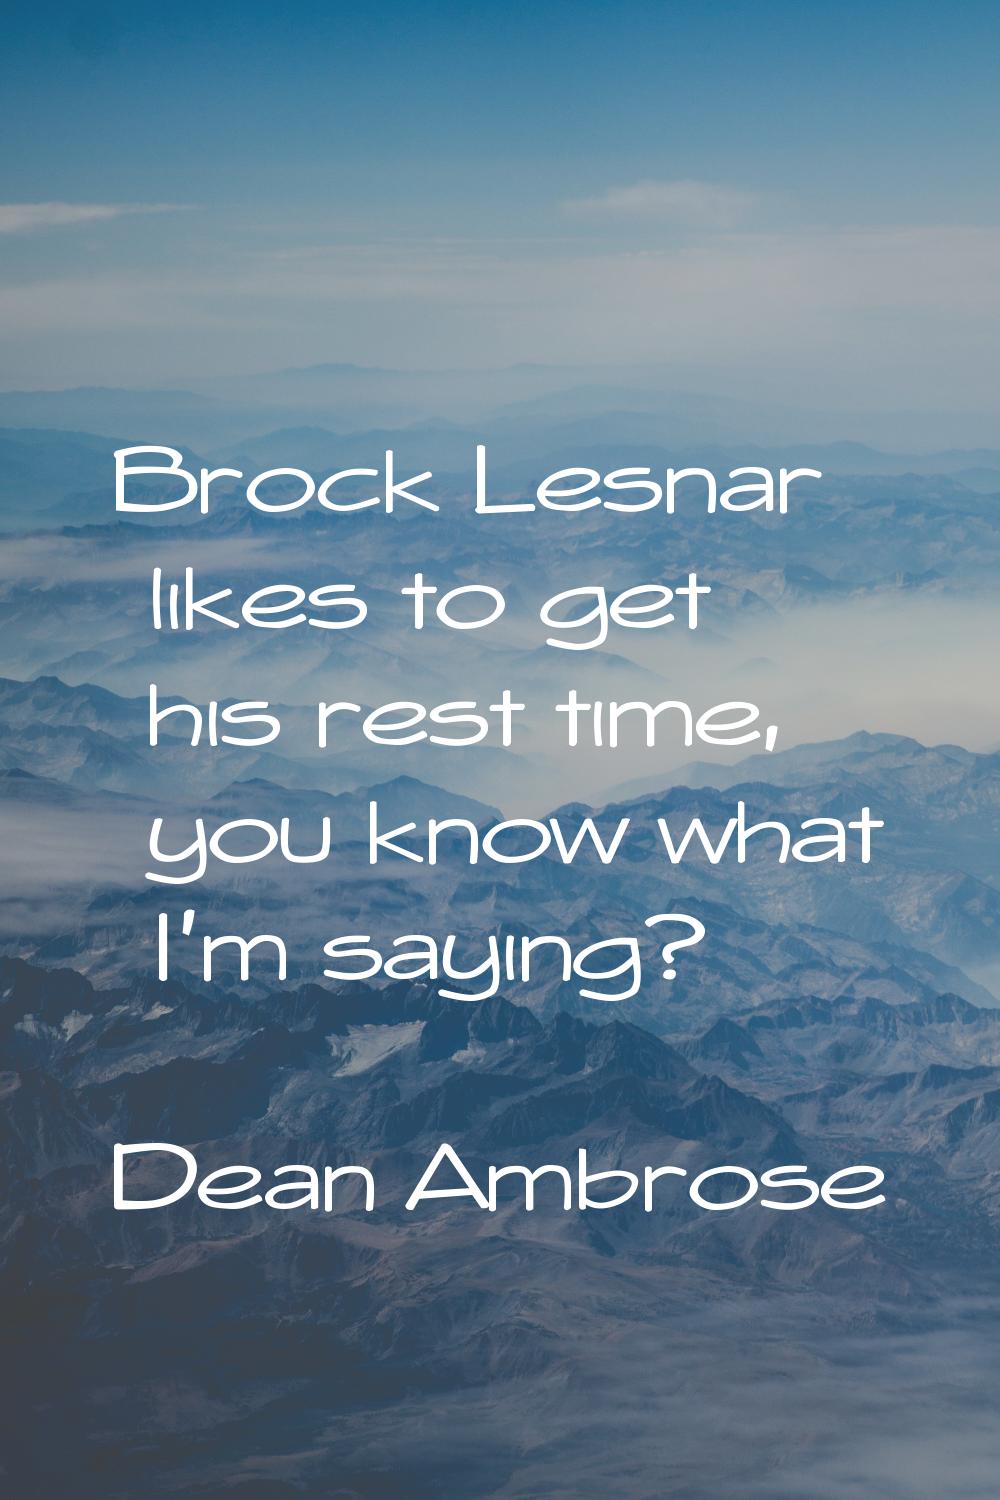 Brock Lesnar likes to get his rest time, you know what I'm saying?